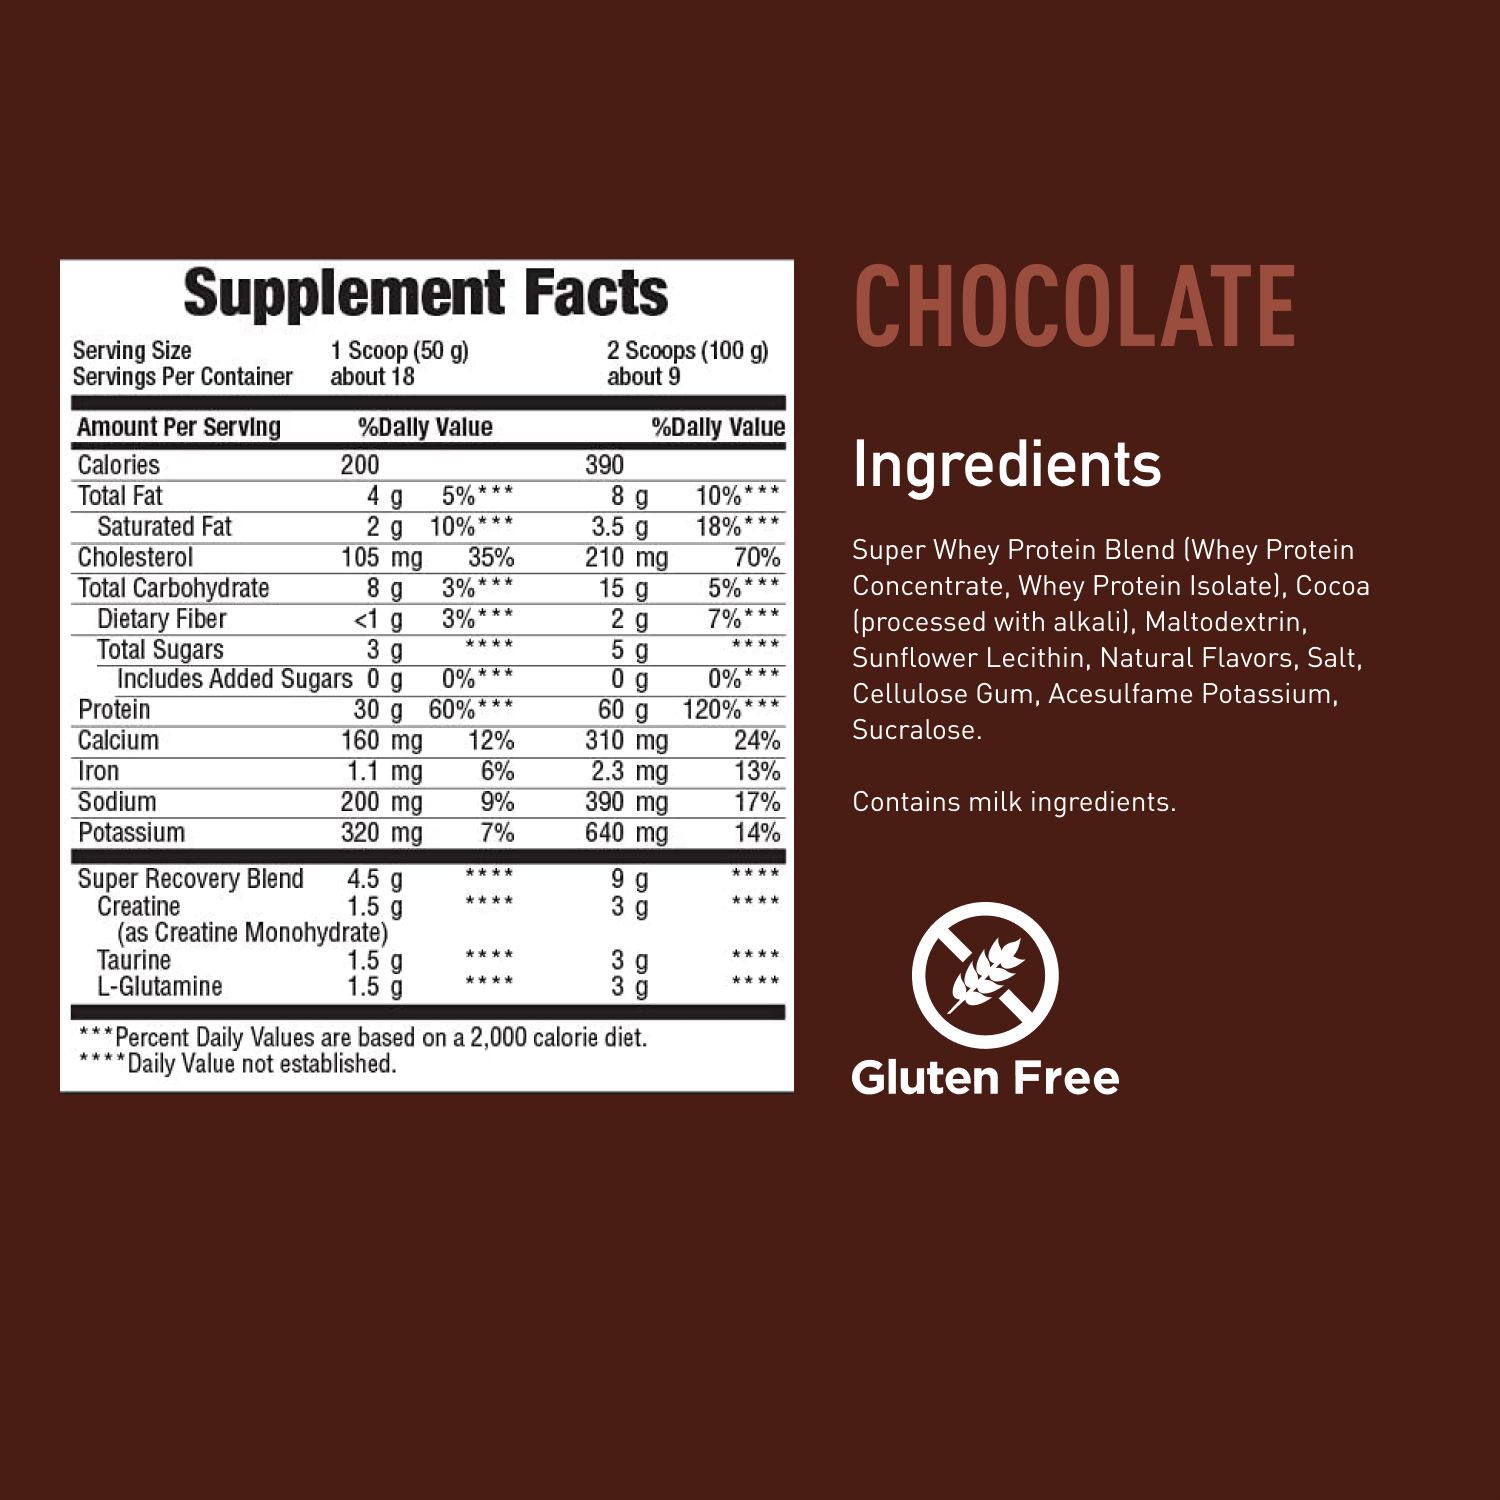 Body Fortress Super Advanced Whey Protein Powder, Chocolate, 60g Protein, 2lb, 32oz - image 2 of 7